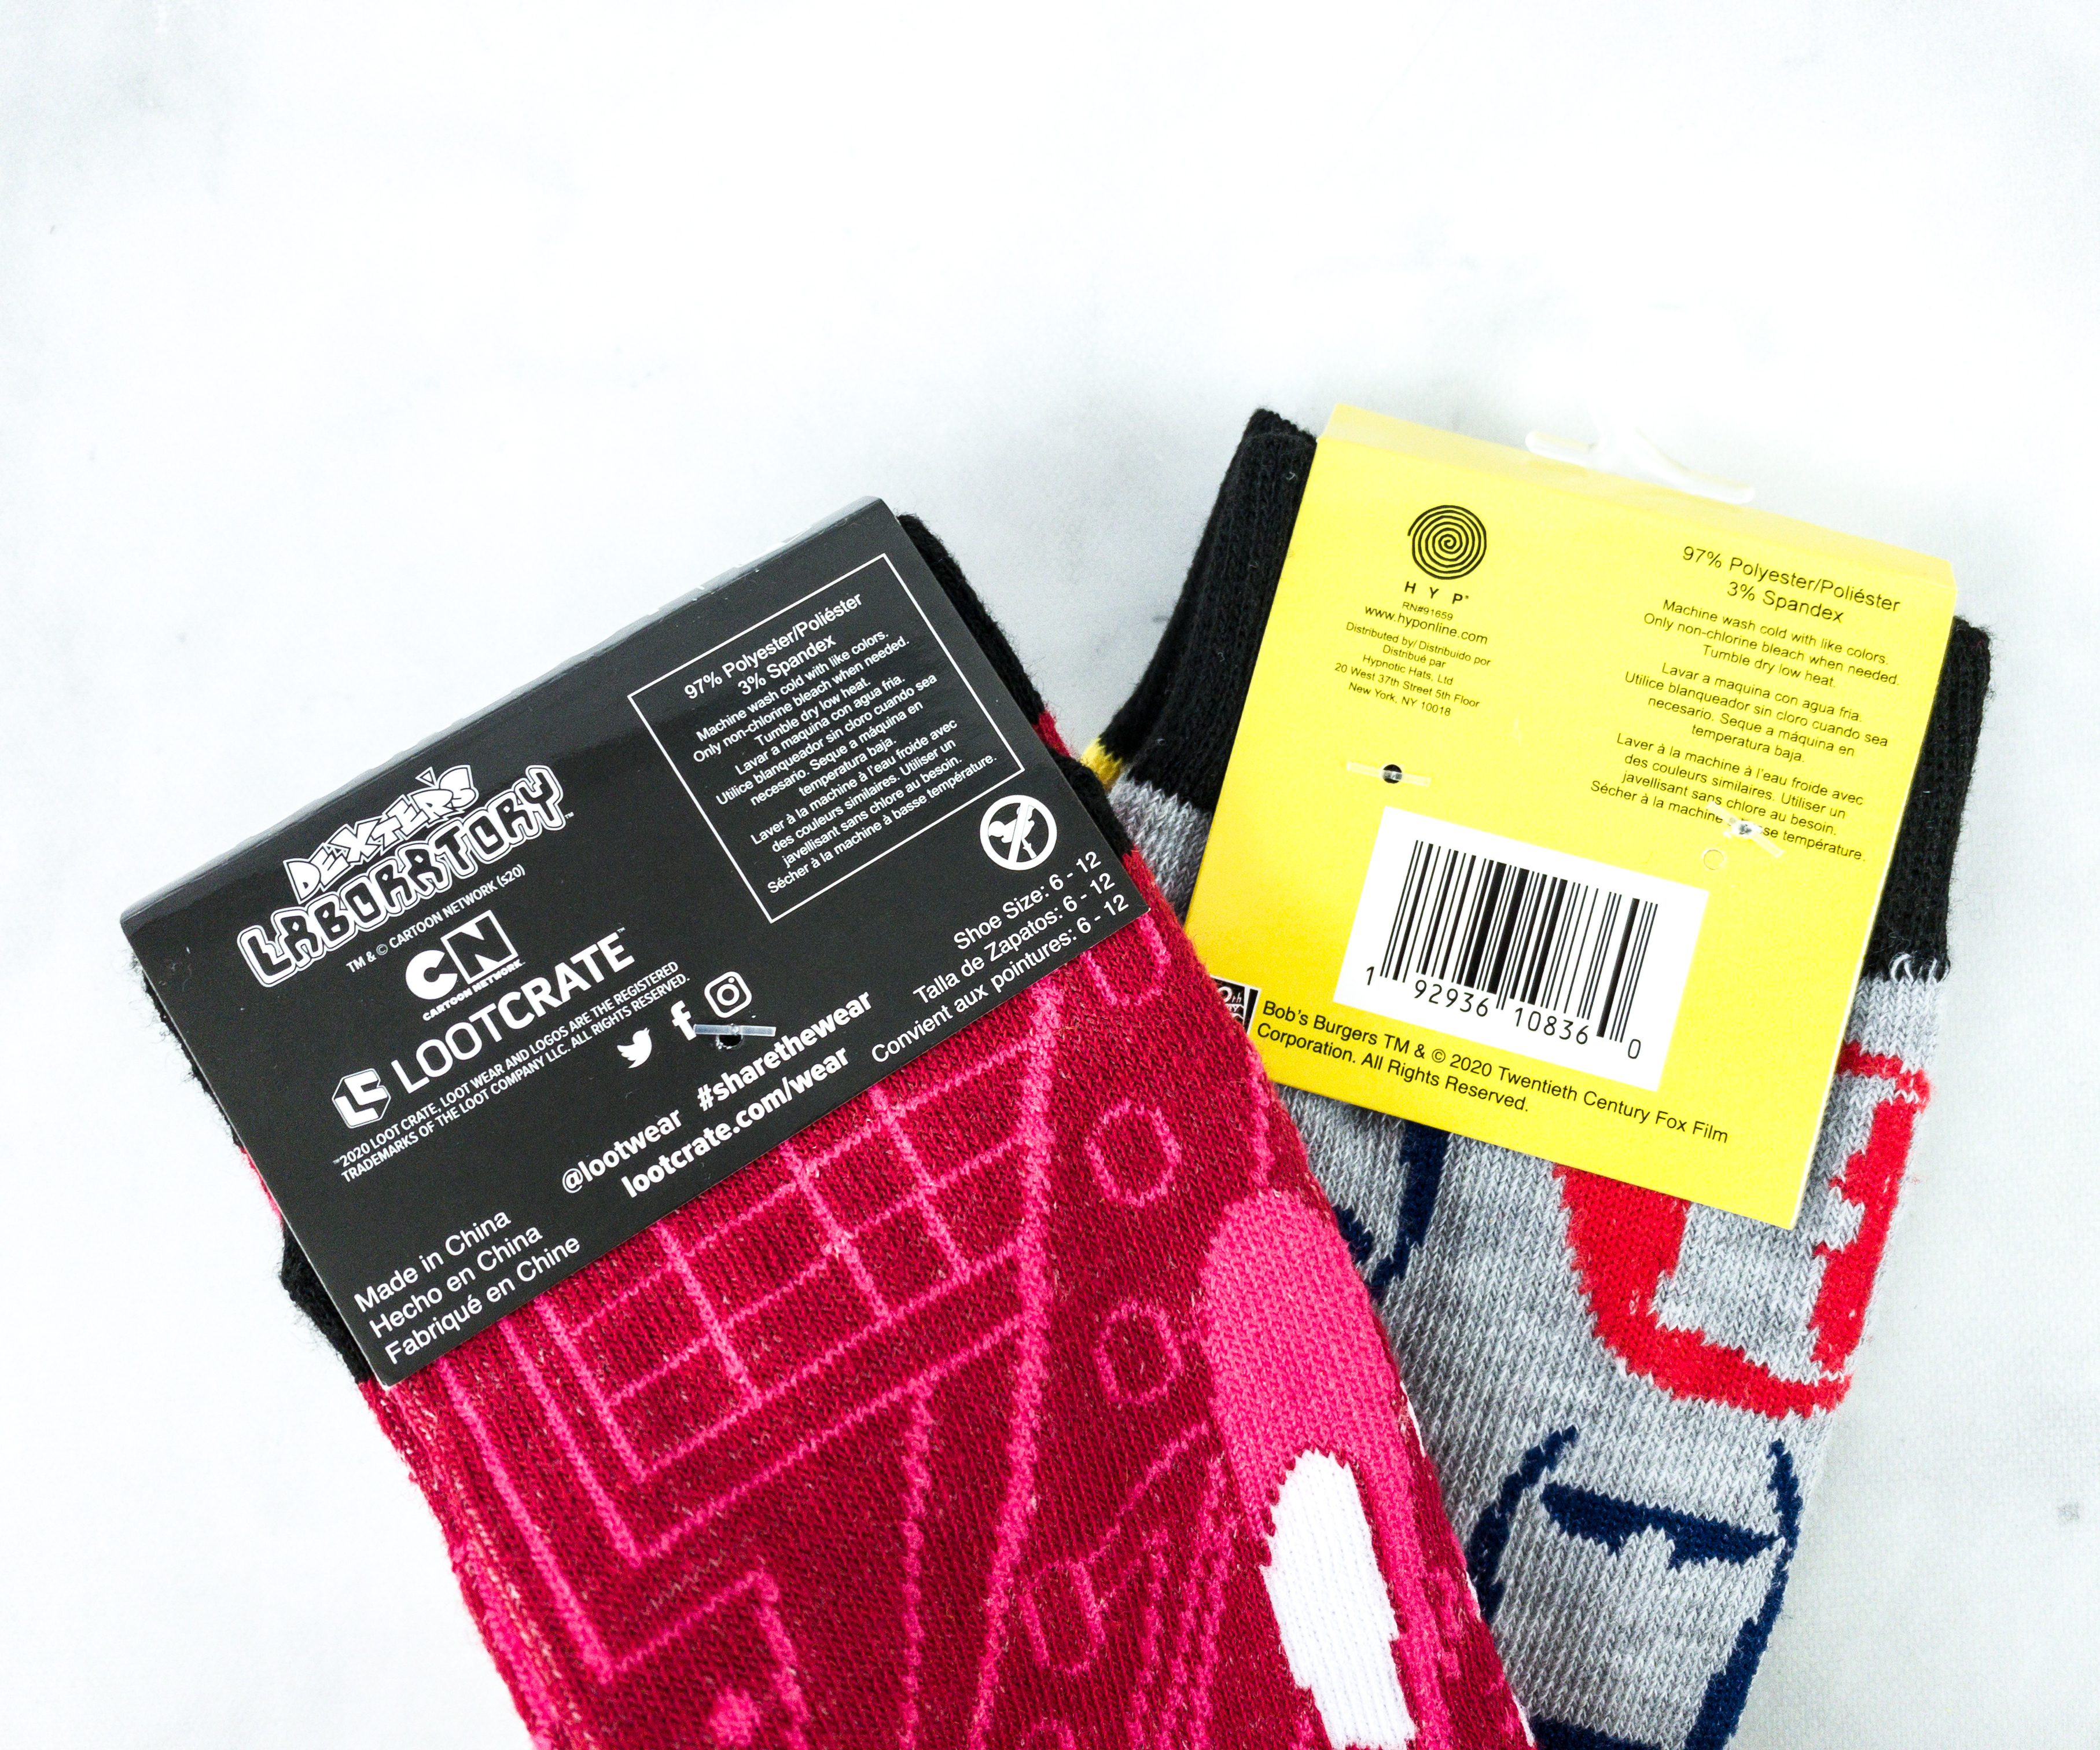 Loot Socks by Loot Crate February 2020 Subscription Box Review & Coupon ...